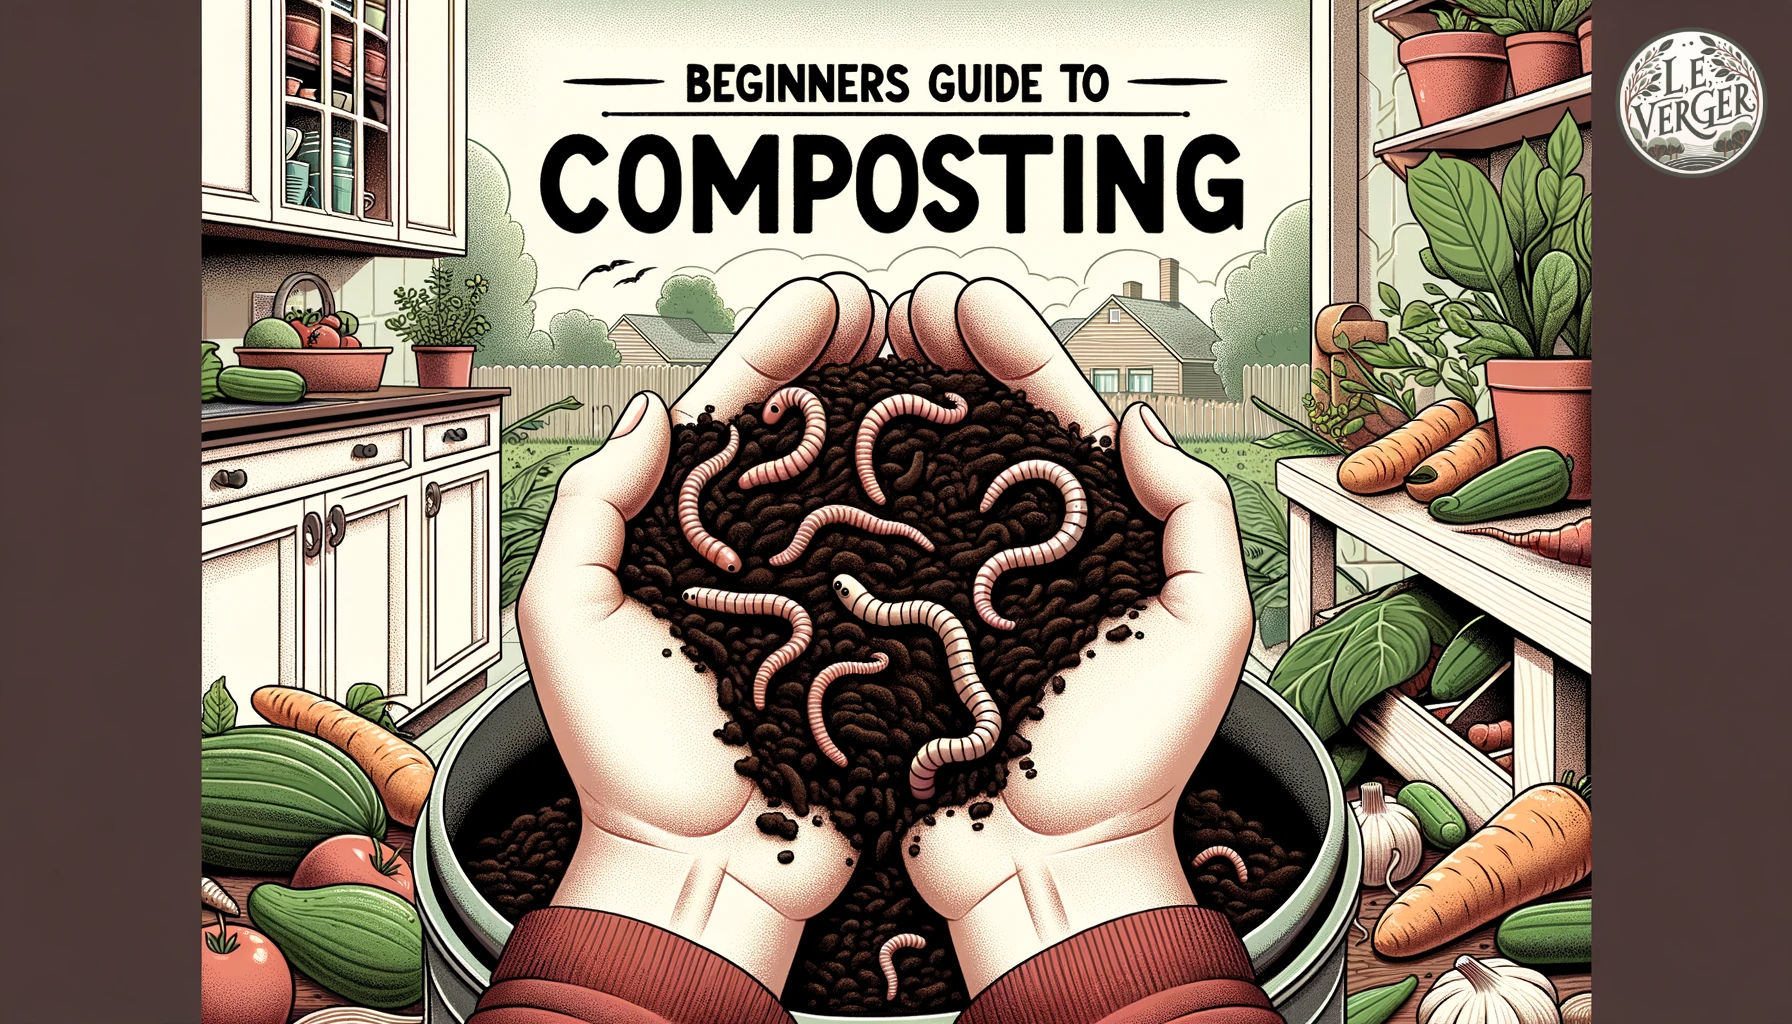 Illustration, wide aspect: A close-up view of hands holding rich, dark compost with worms wriggling through. Behind this, a kitchen counter holds a small composting container, and a garden can be seen in the distance. The title 'Beginners Guide to Composting' is placed at the top in an elegant font.